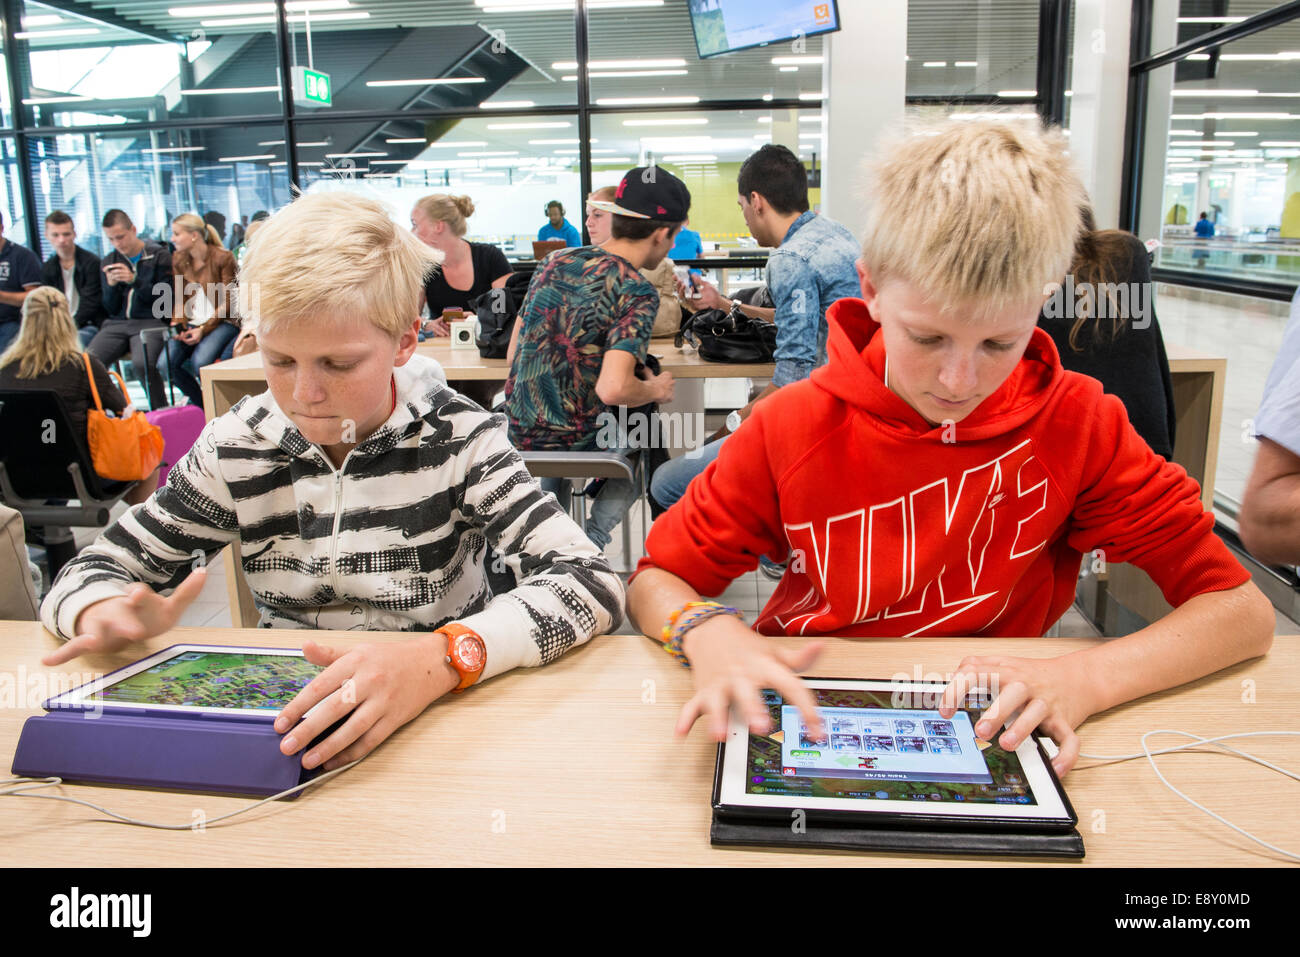 Boys playing games on their tablets, Schiphol Airport, Netherlands Stock Photo